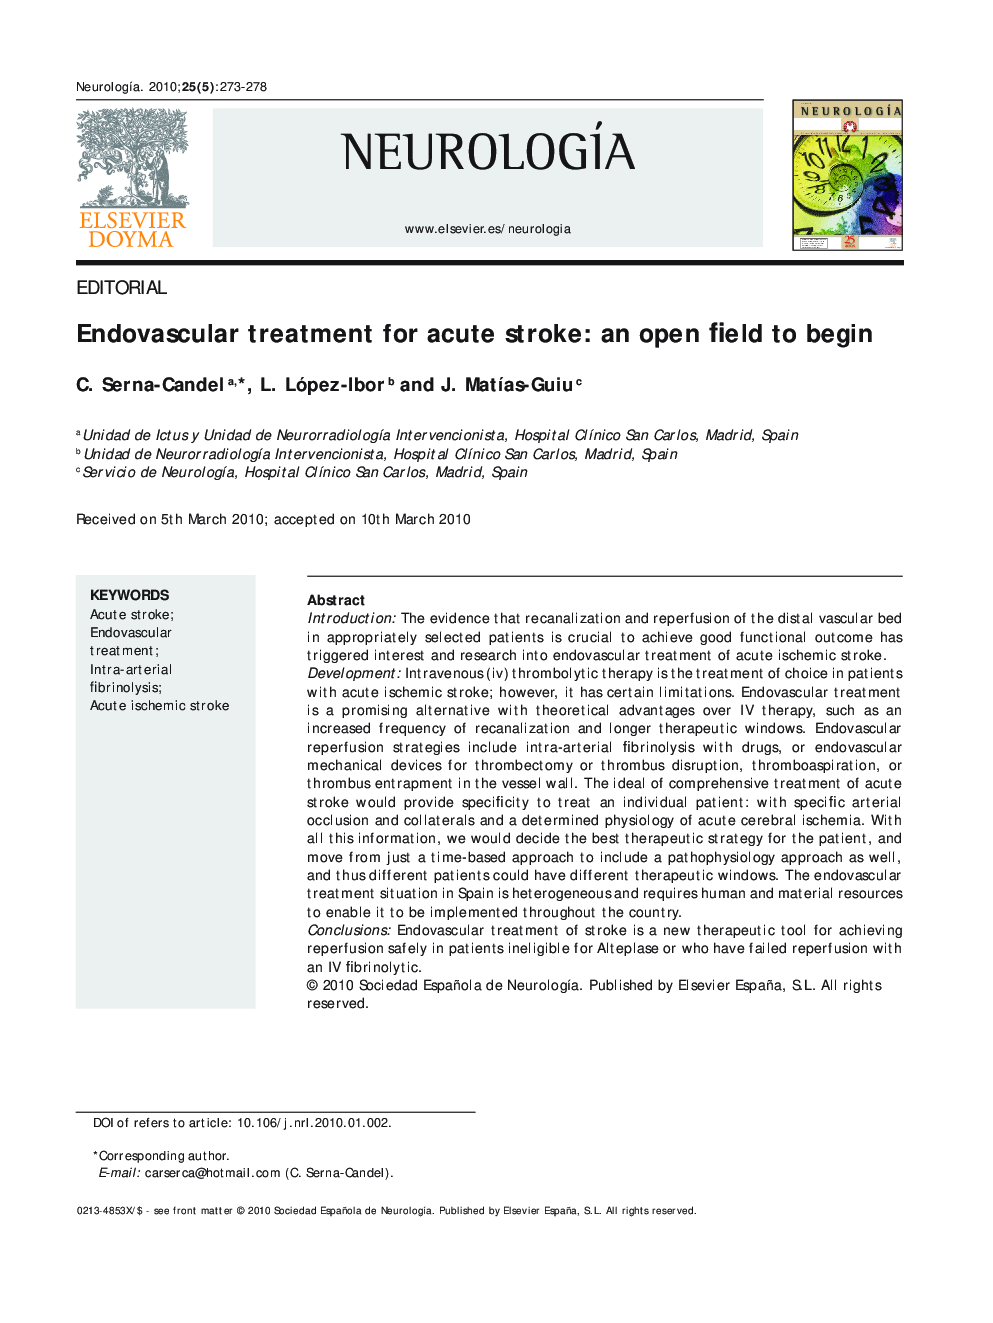 Endovascular treatment for acute stroke: An open field to begin